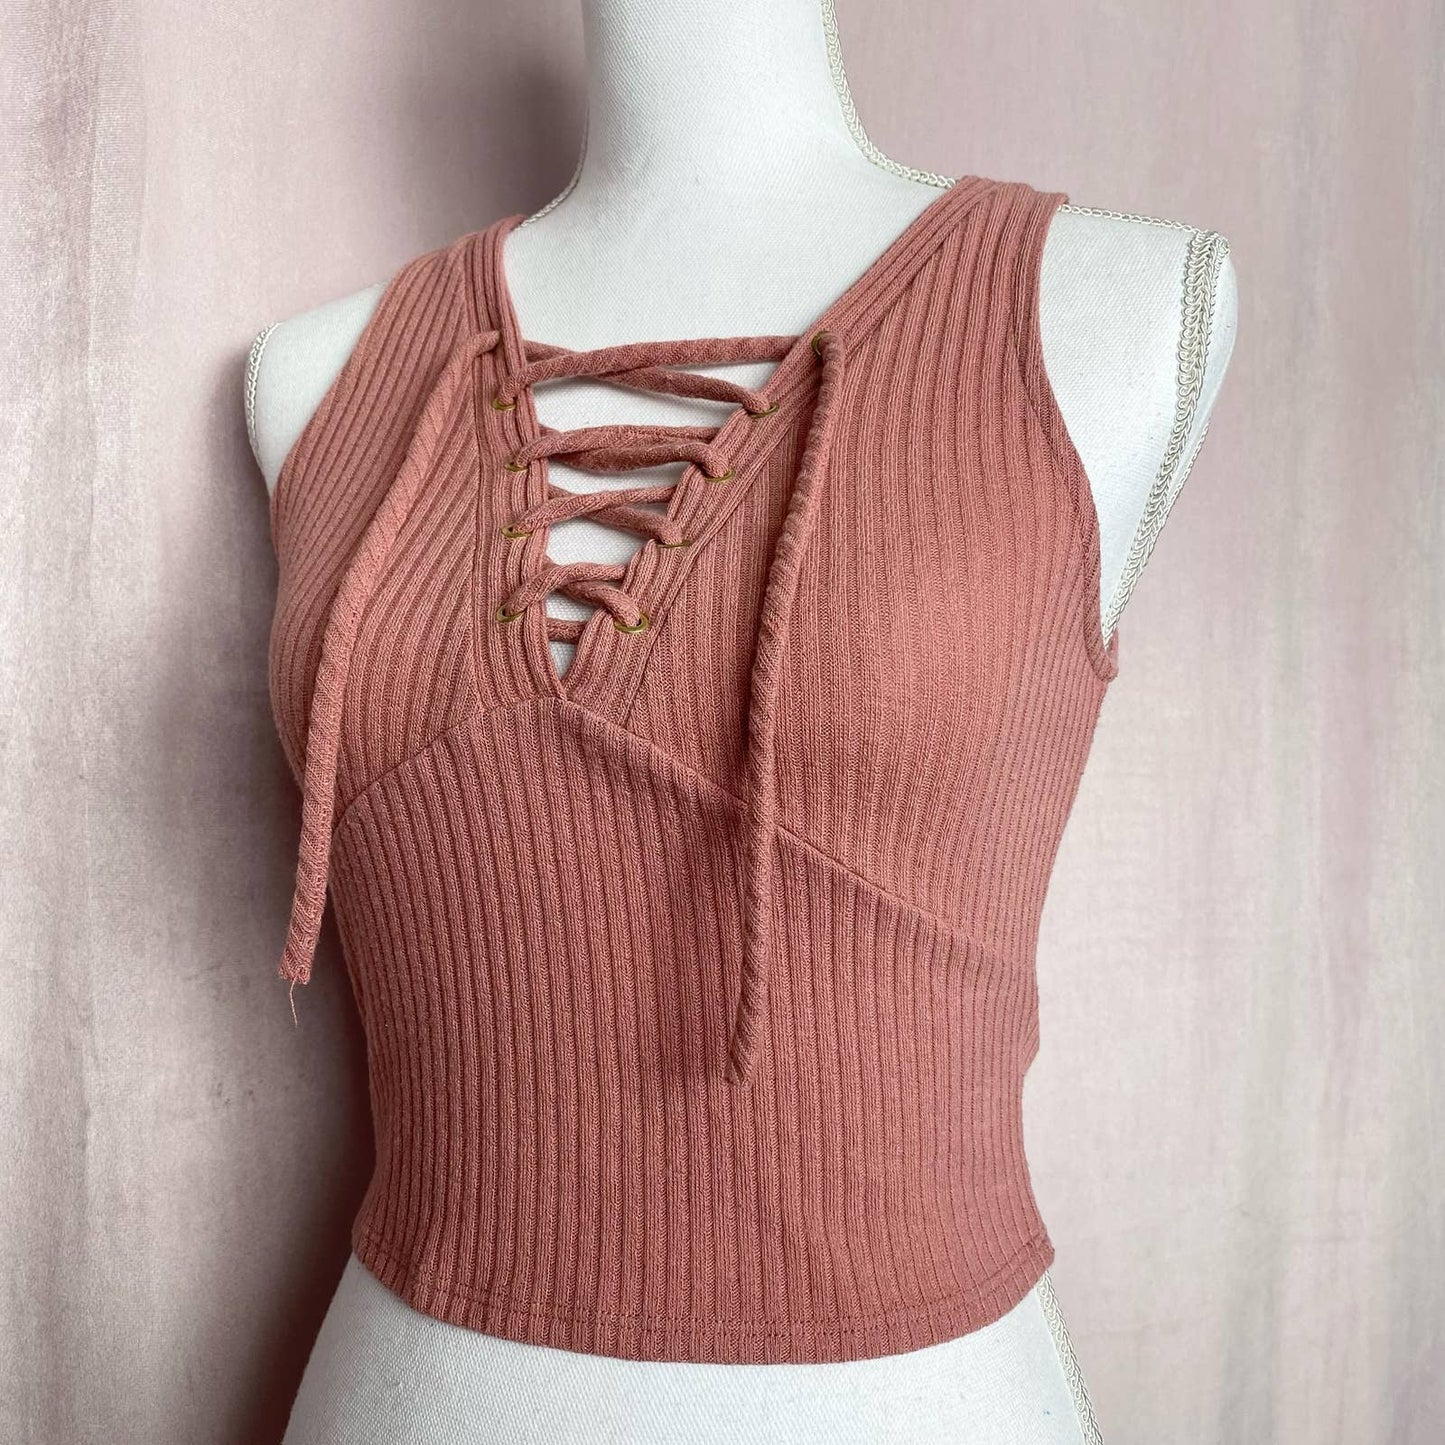 Secondhand Q Lace Up Ribbed Crop Tank Top, Size Small